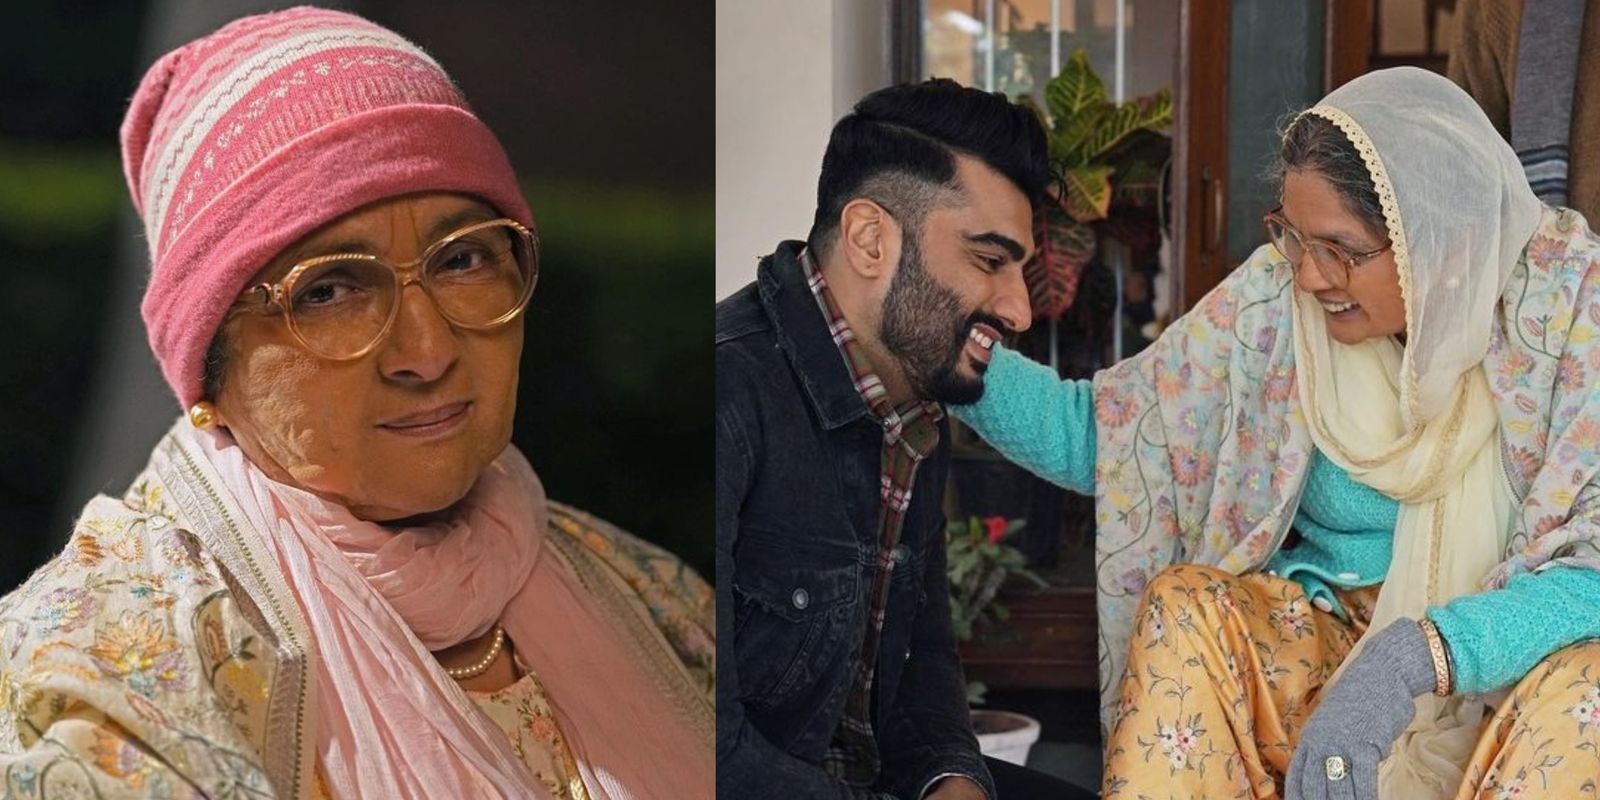 Sardar Ka Grandson: Neena Gupta Opens Up About Getting The Look Right To Play Arjun Kapoor’s 80-Year-Old Grandmother